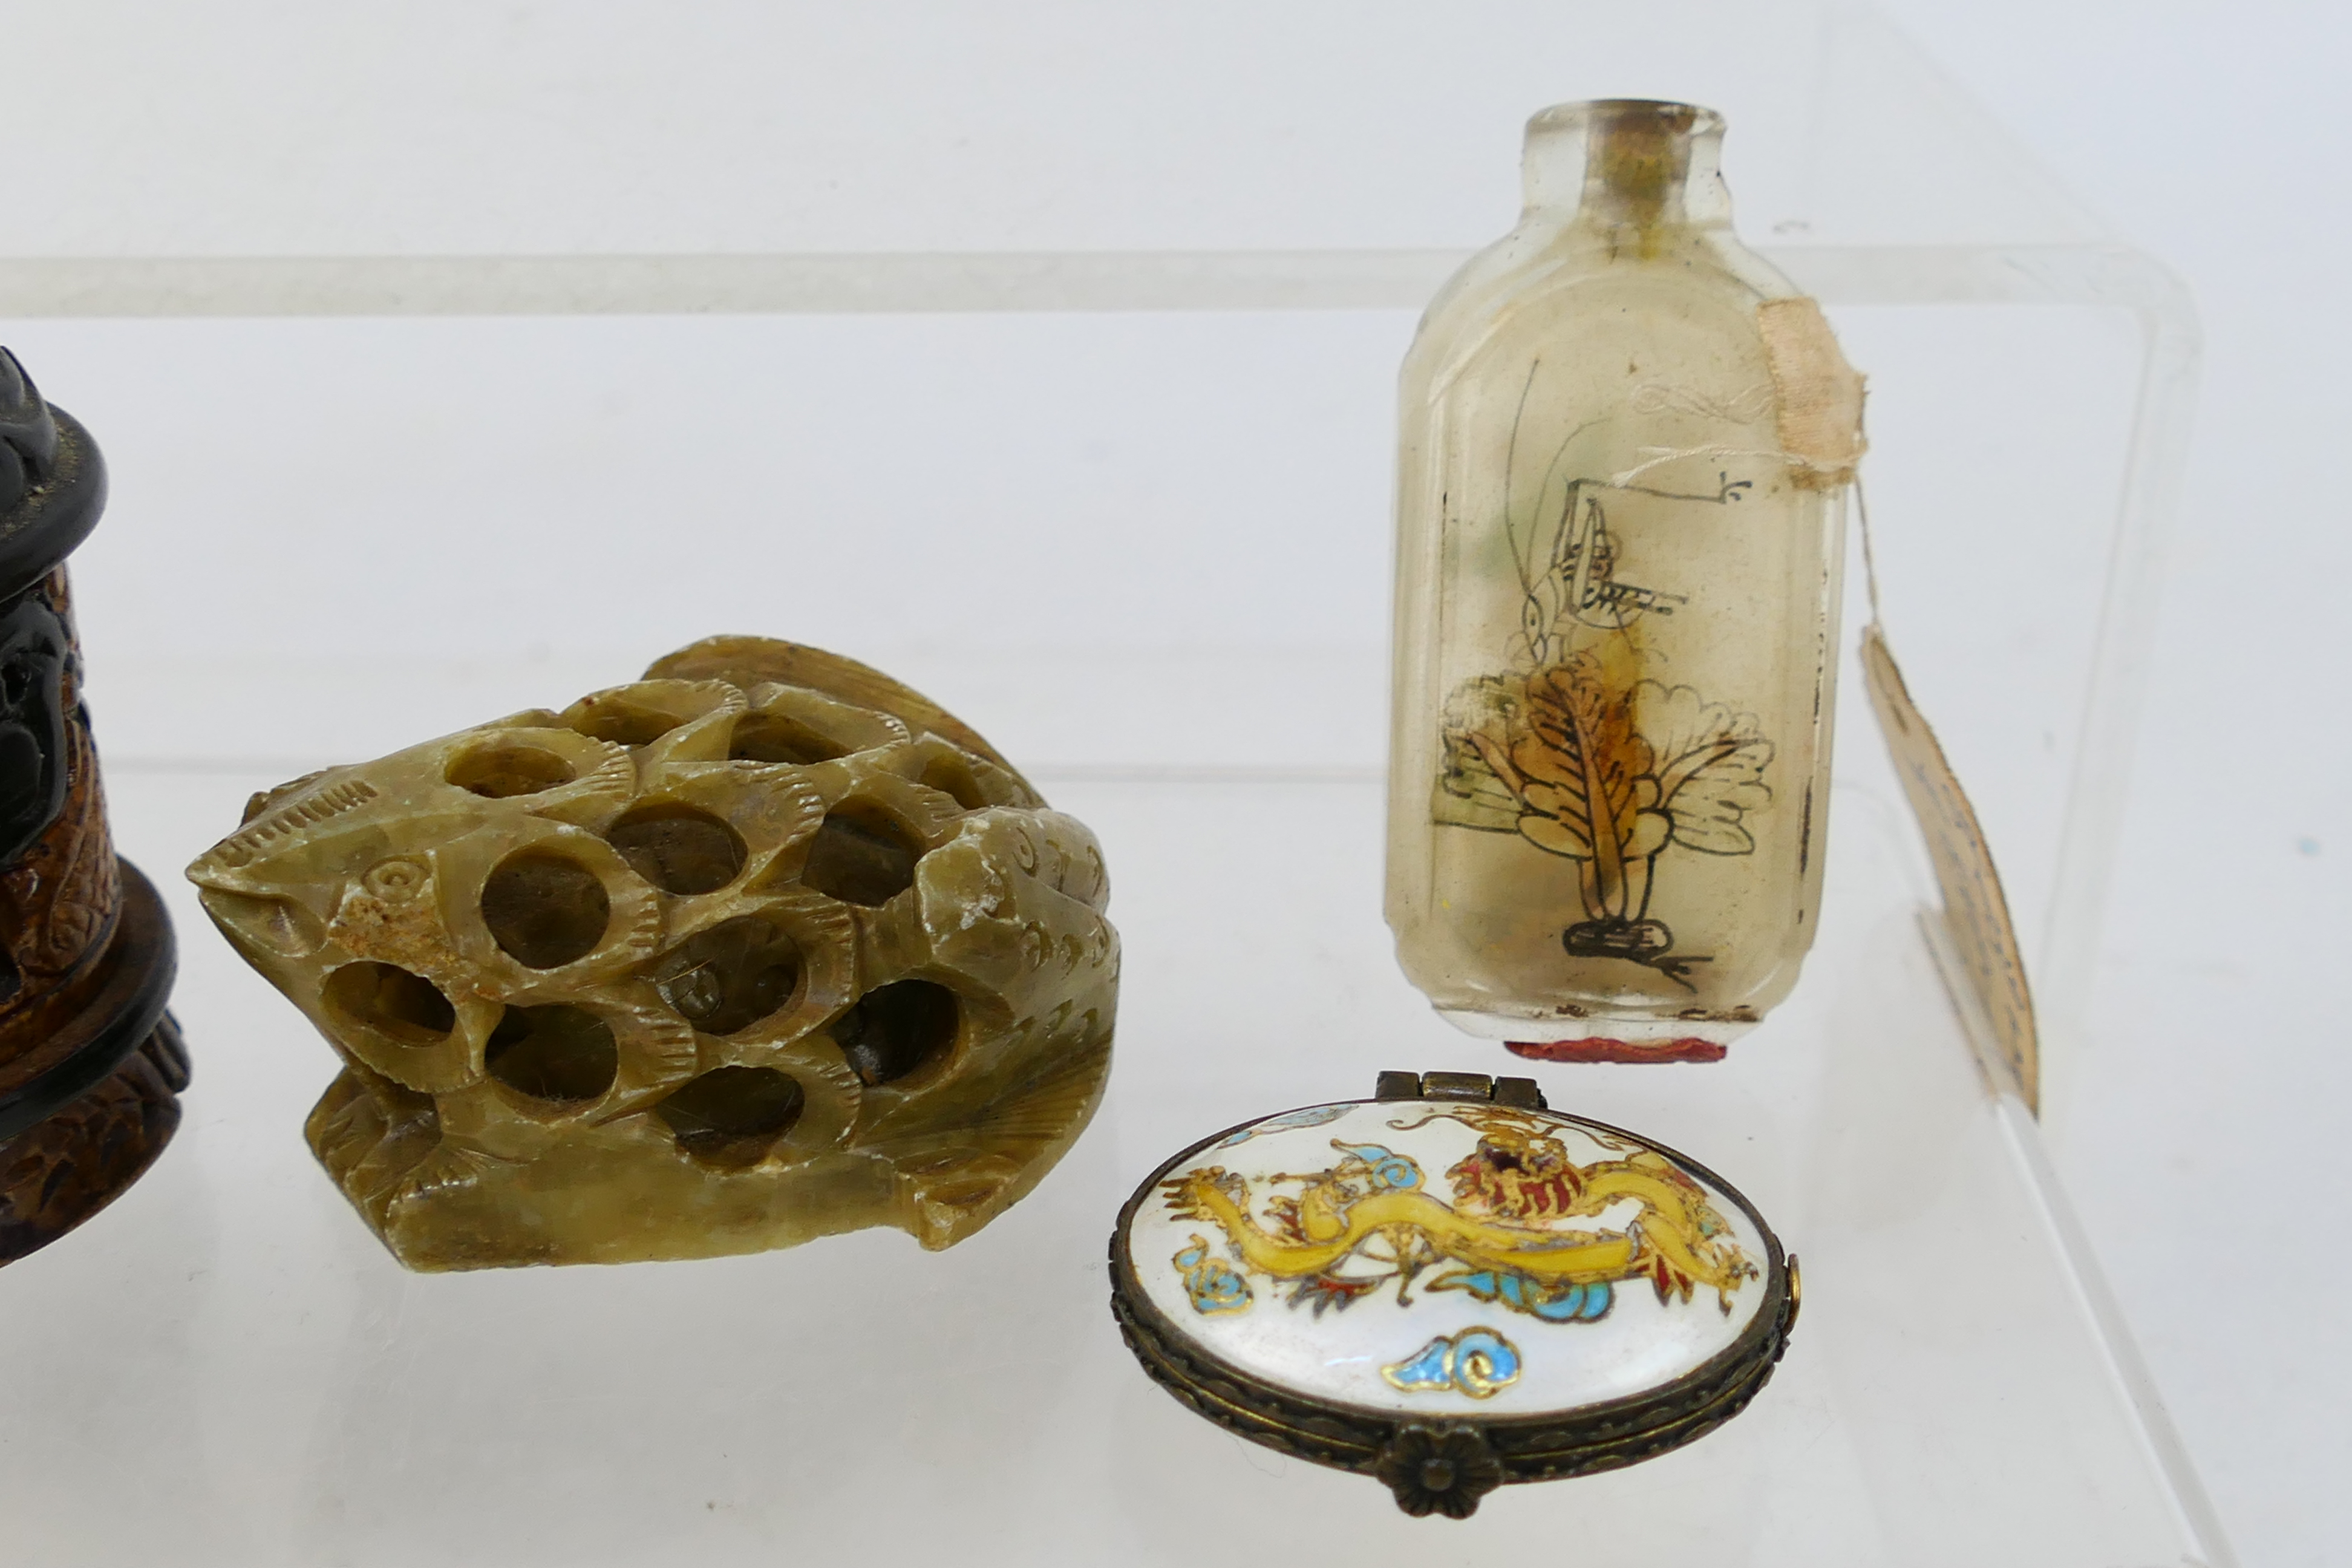 Lot to include snuff bottles, glass and ceramic examples, carved stone items and other. - Image 13 of 23